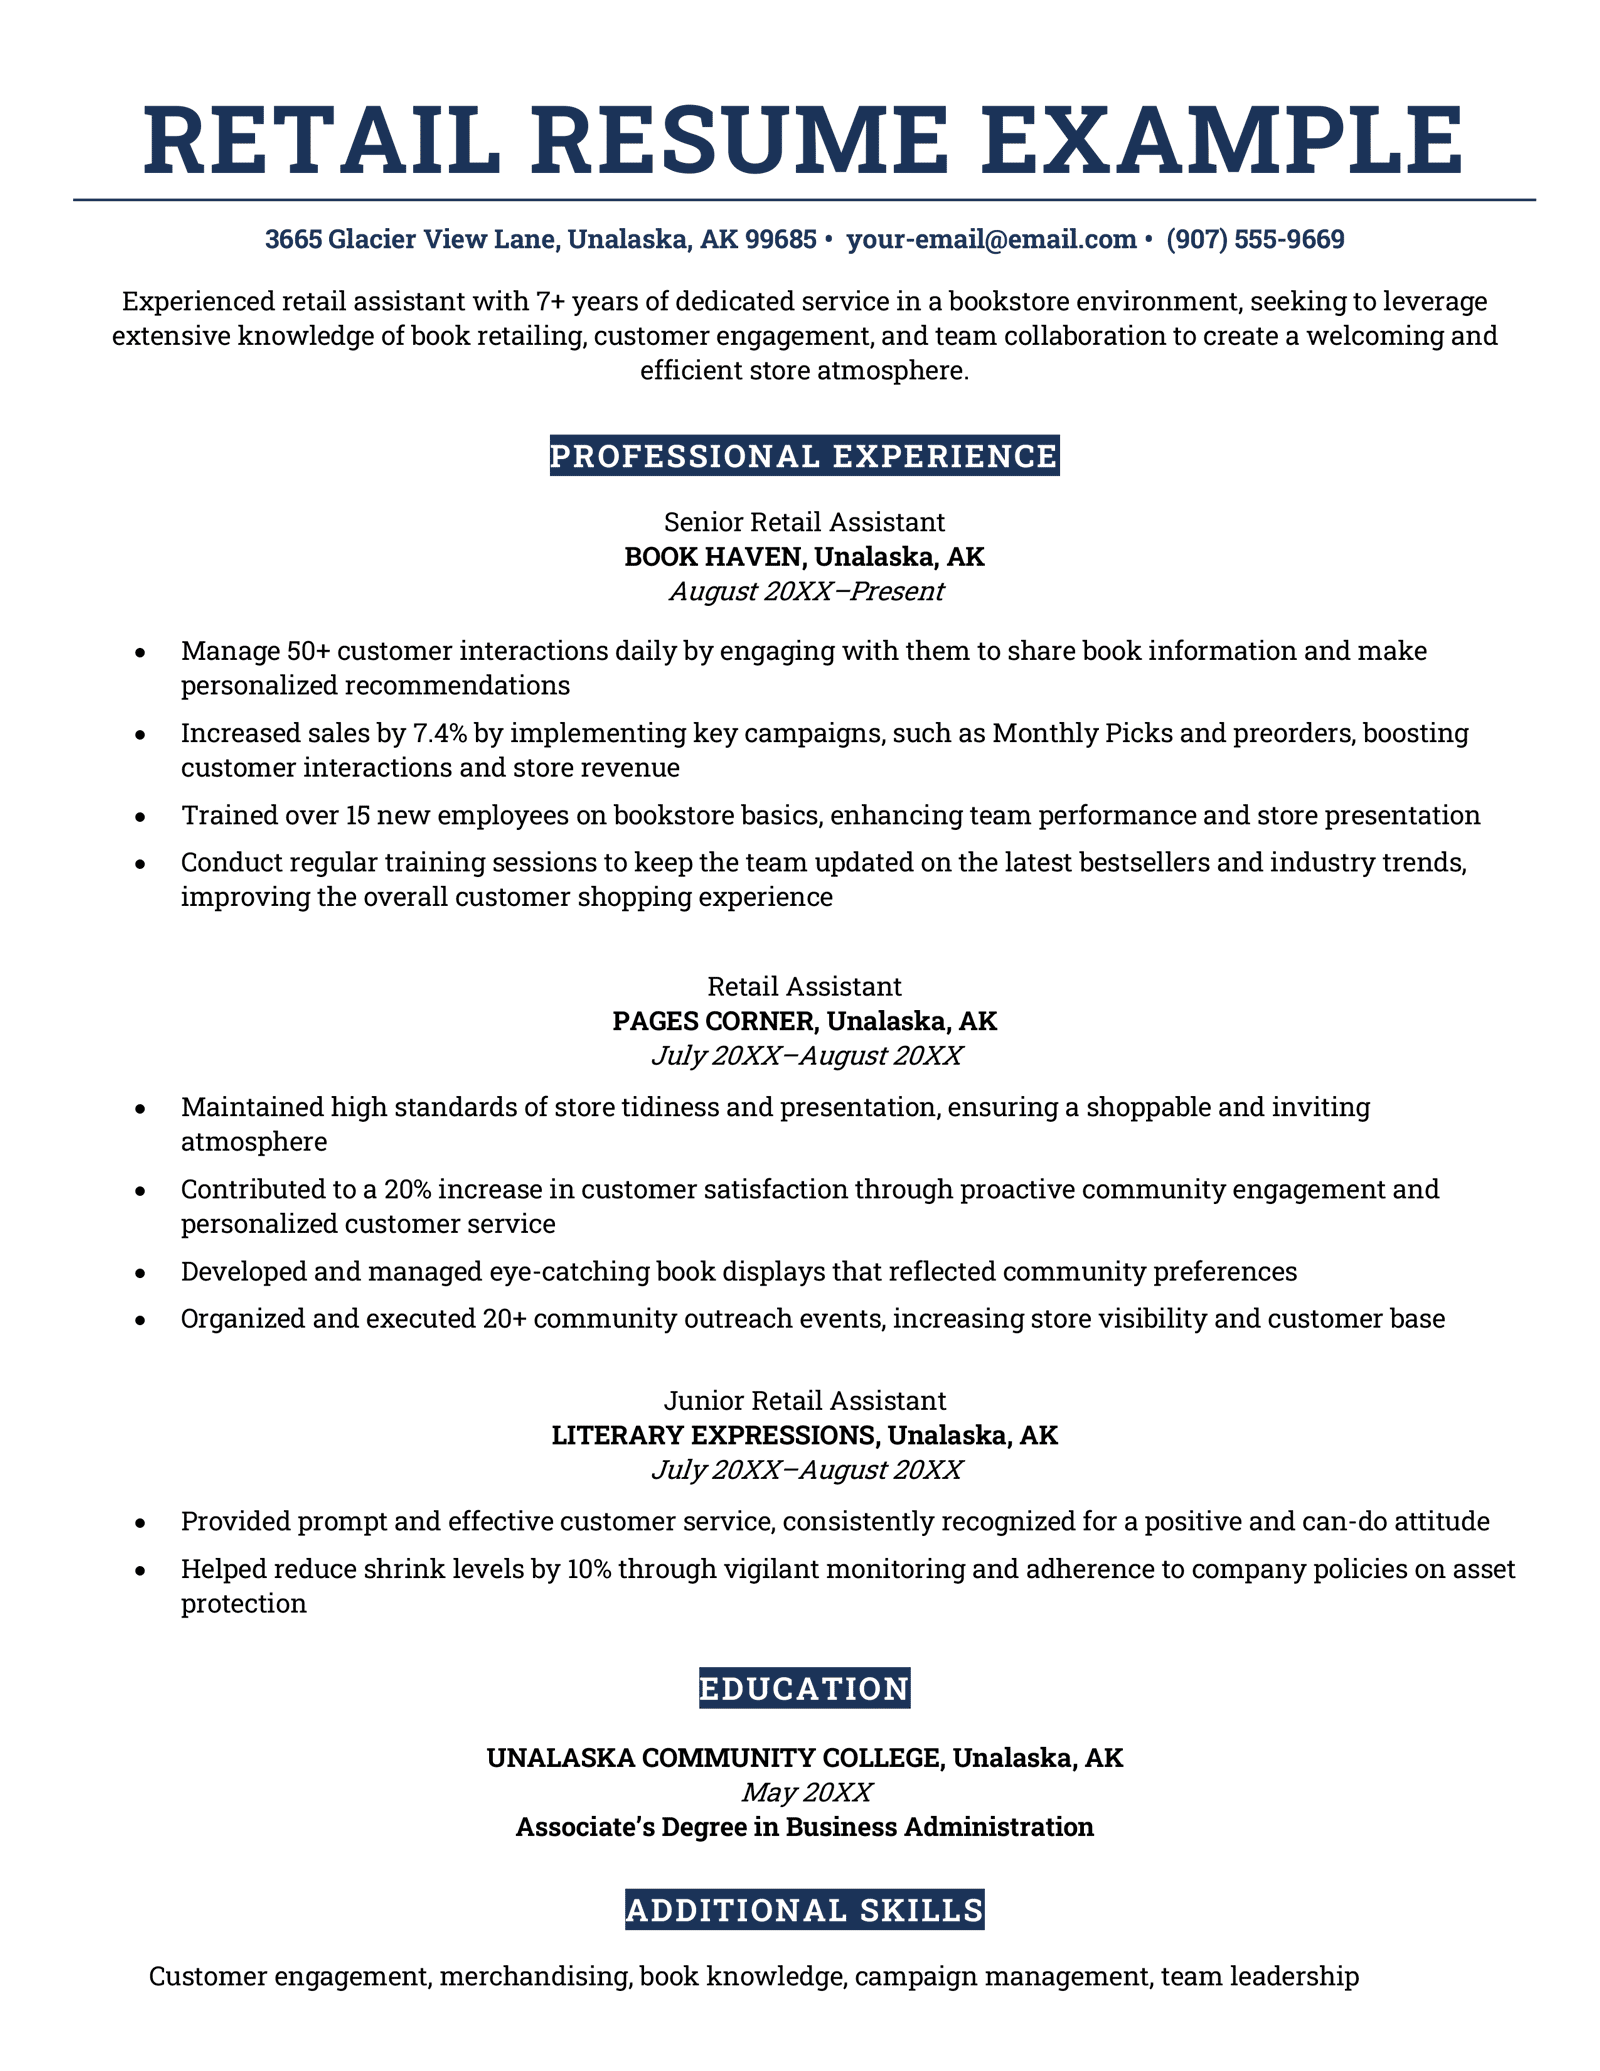 A retail resume example in a navy blue color scheme with sections demarcated by solid blocks of color.